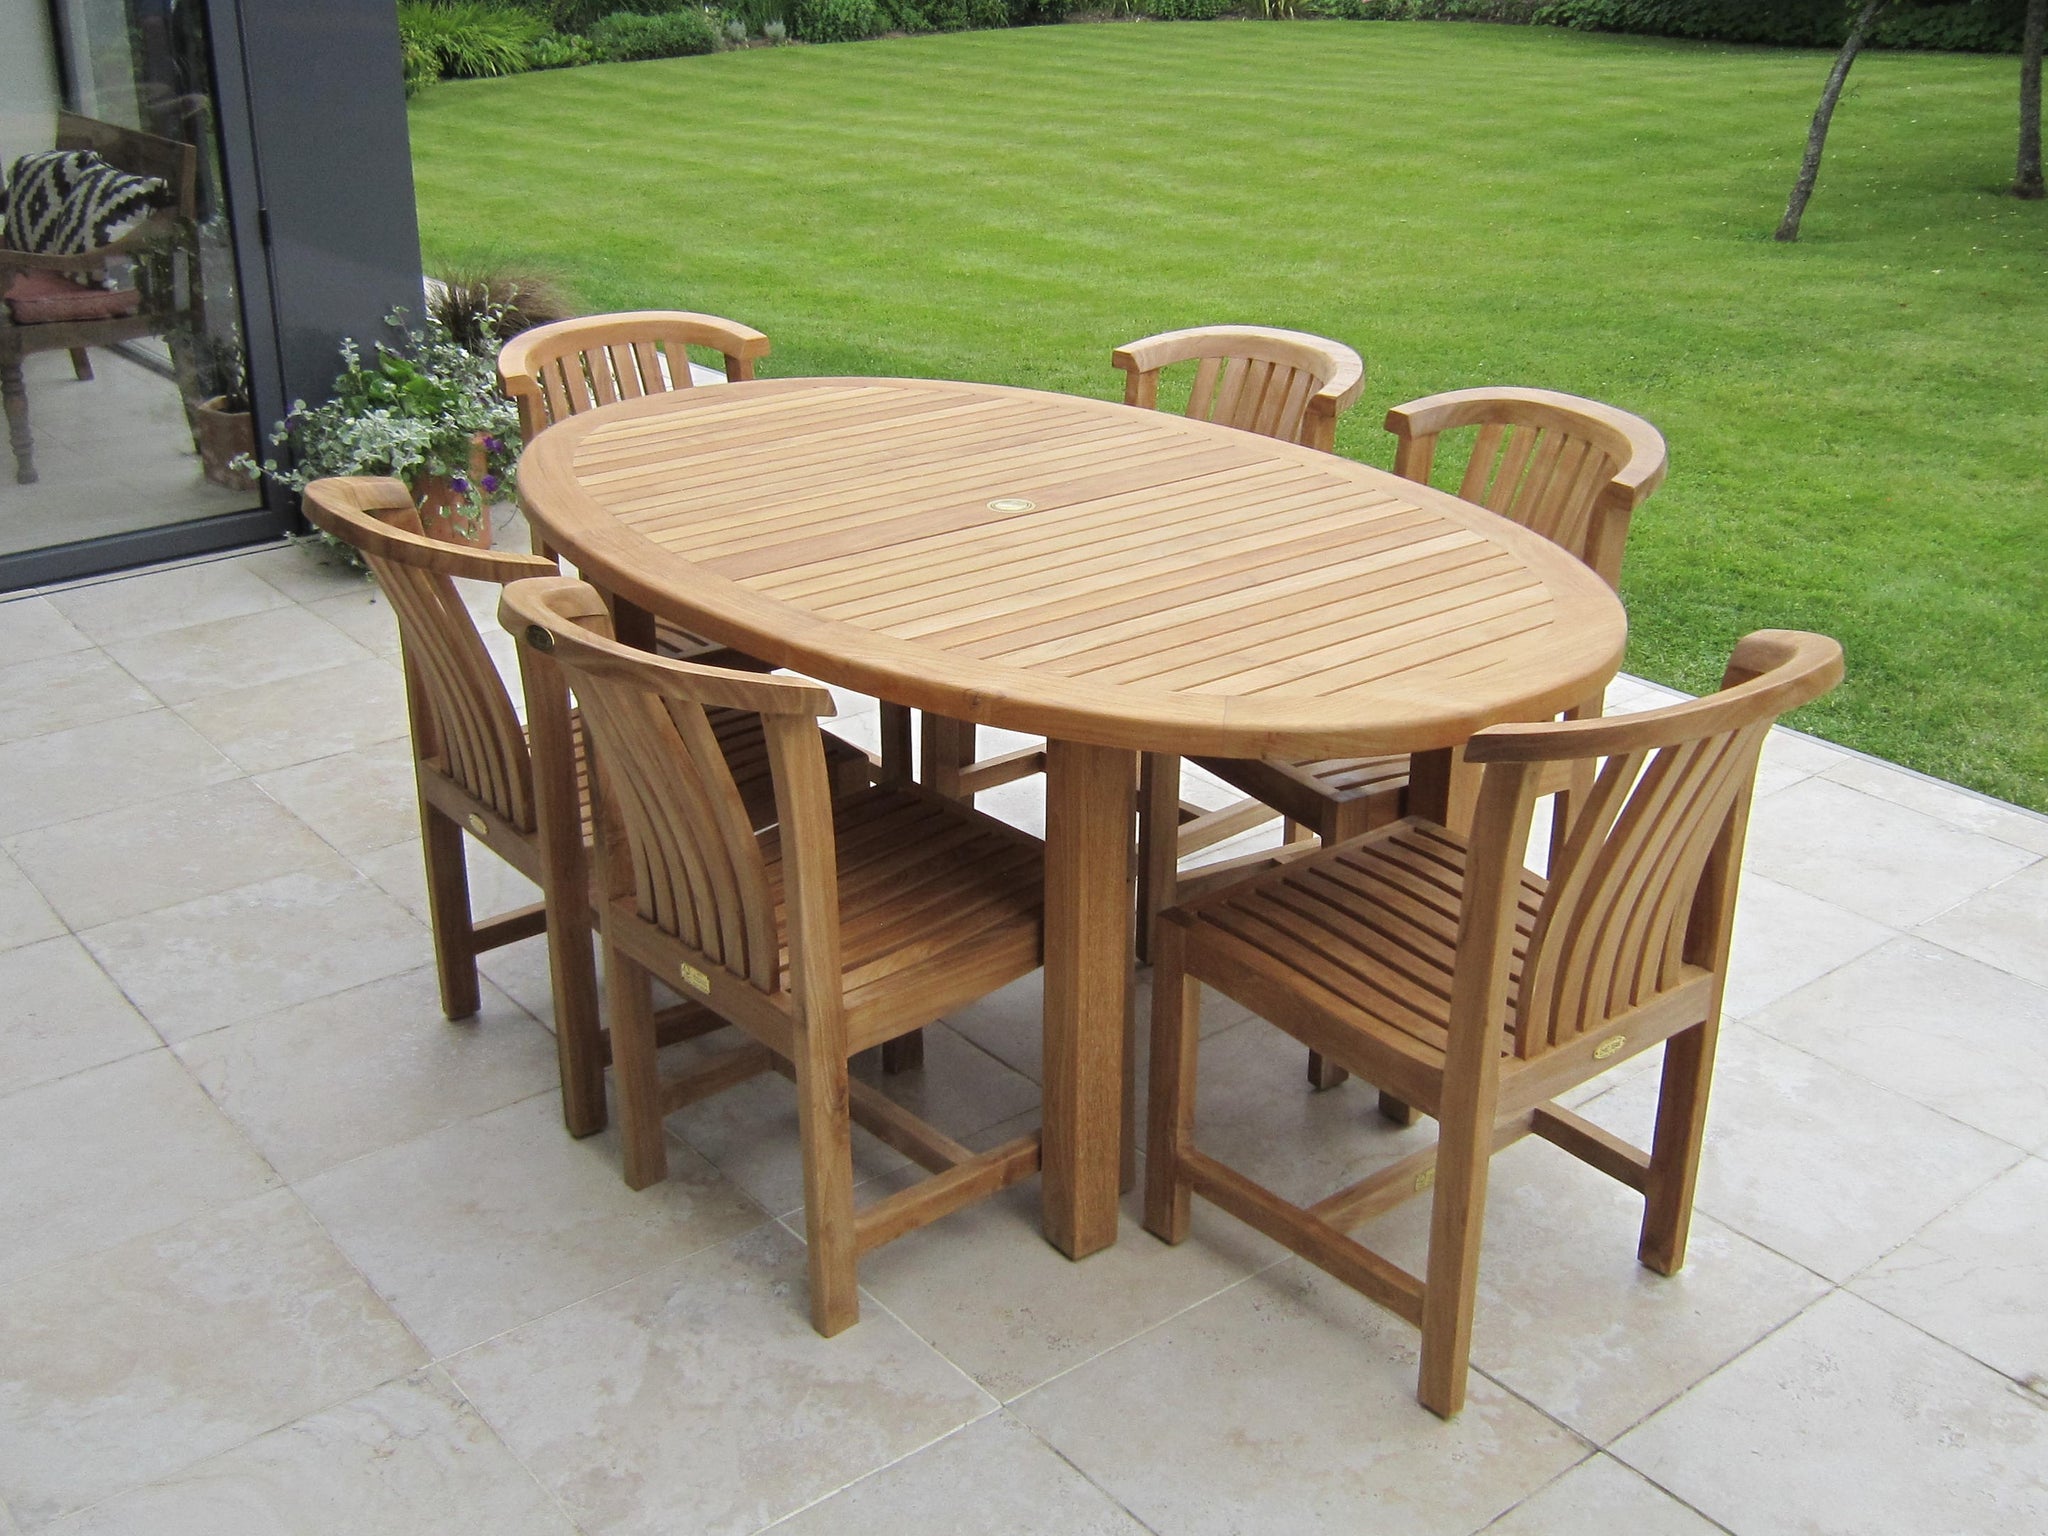 Teak Oval Garden Dining Table with Winchester Dining Chair Set